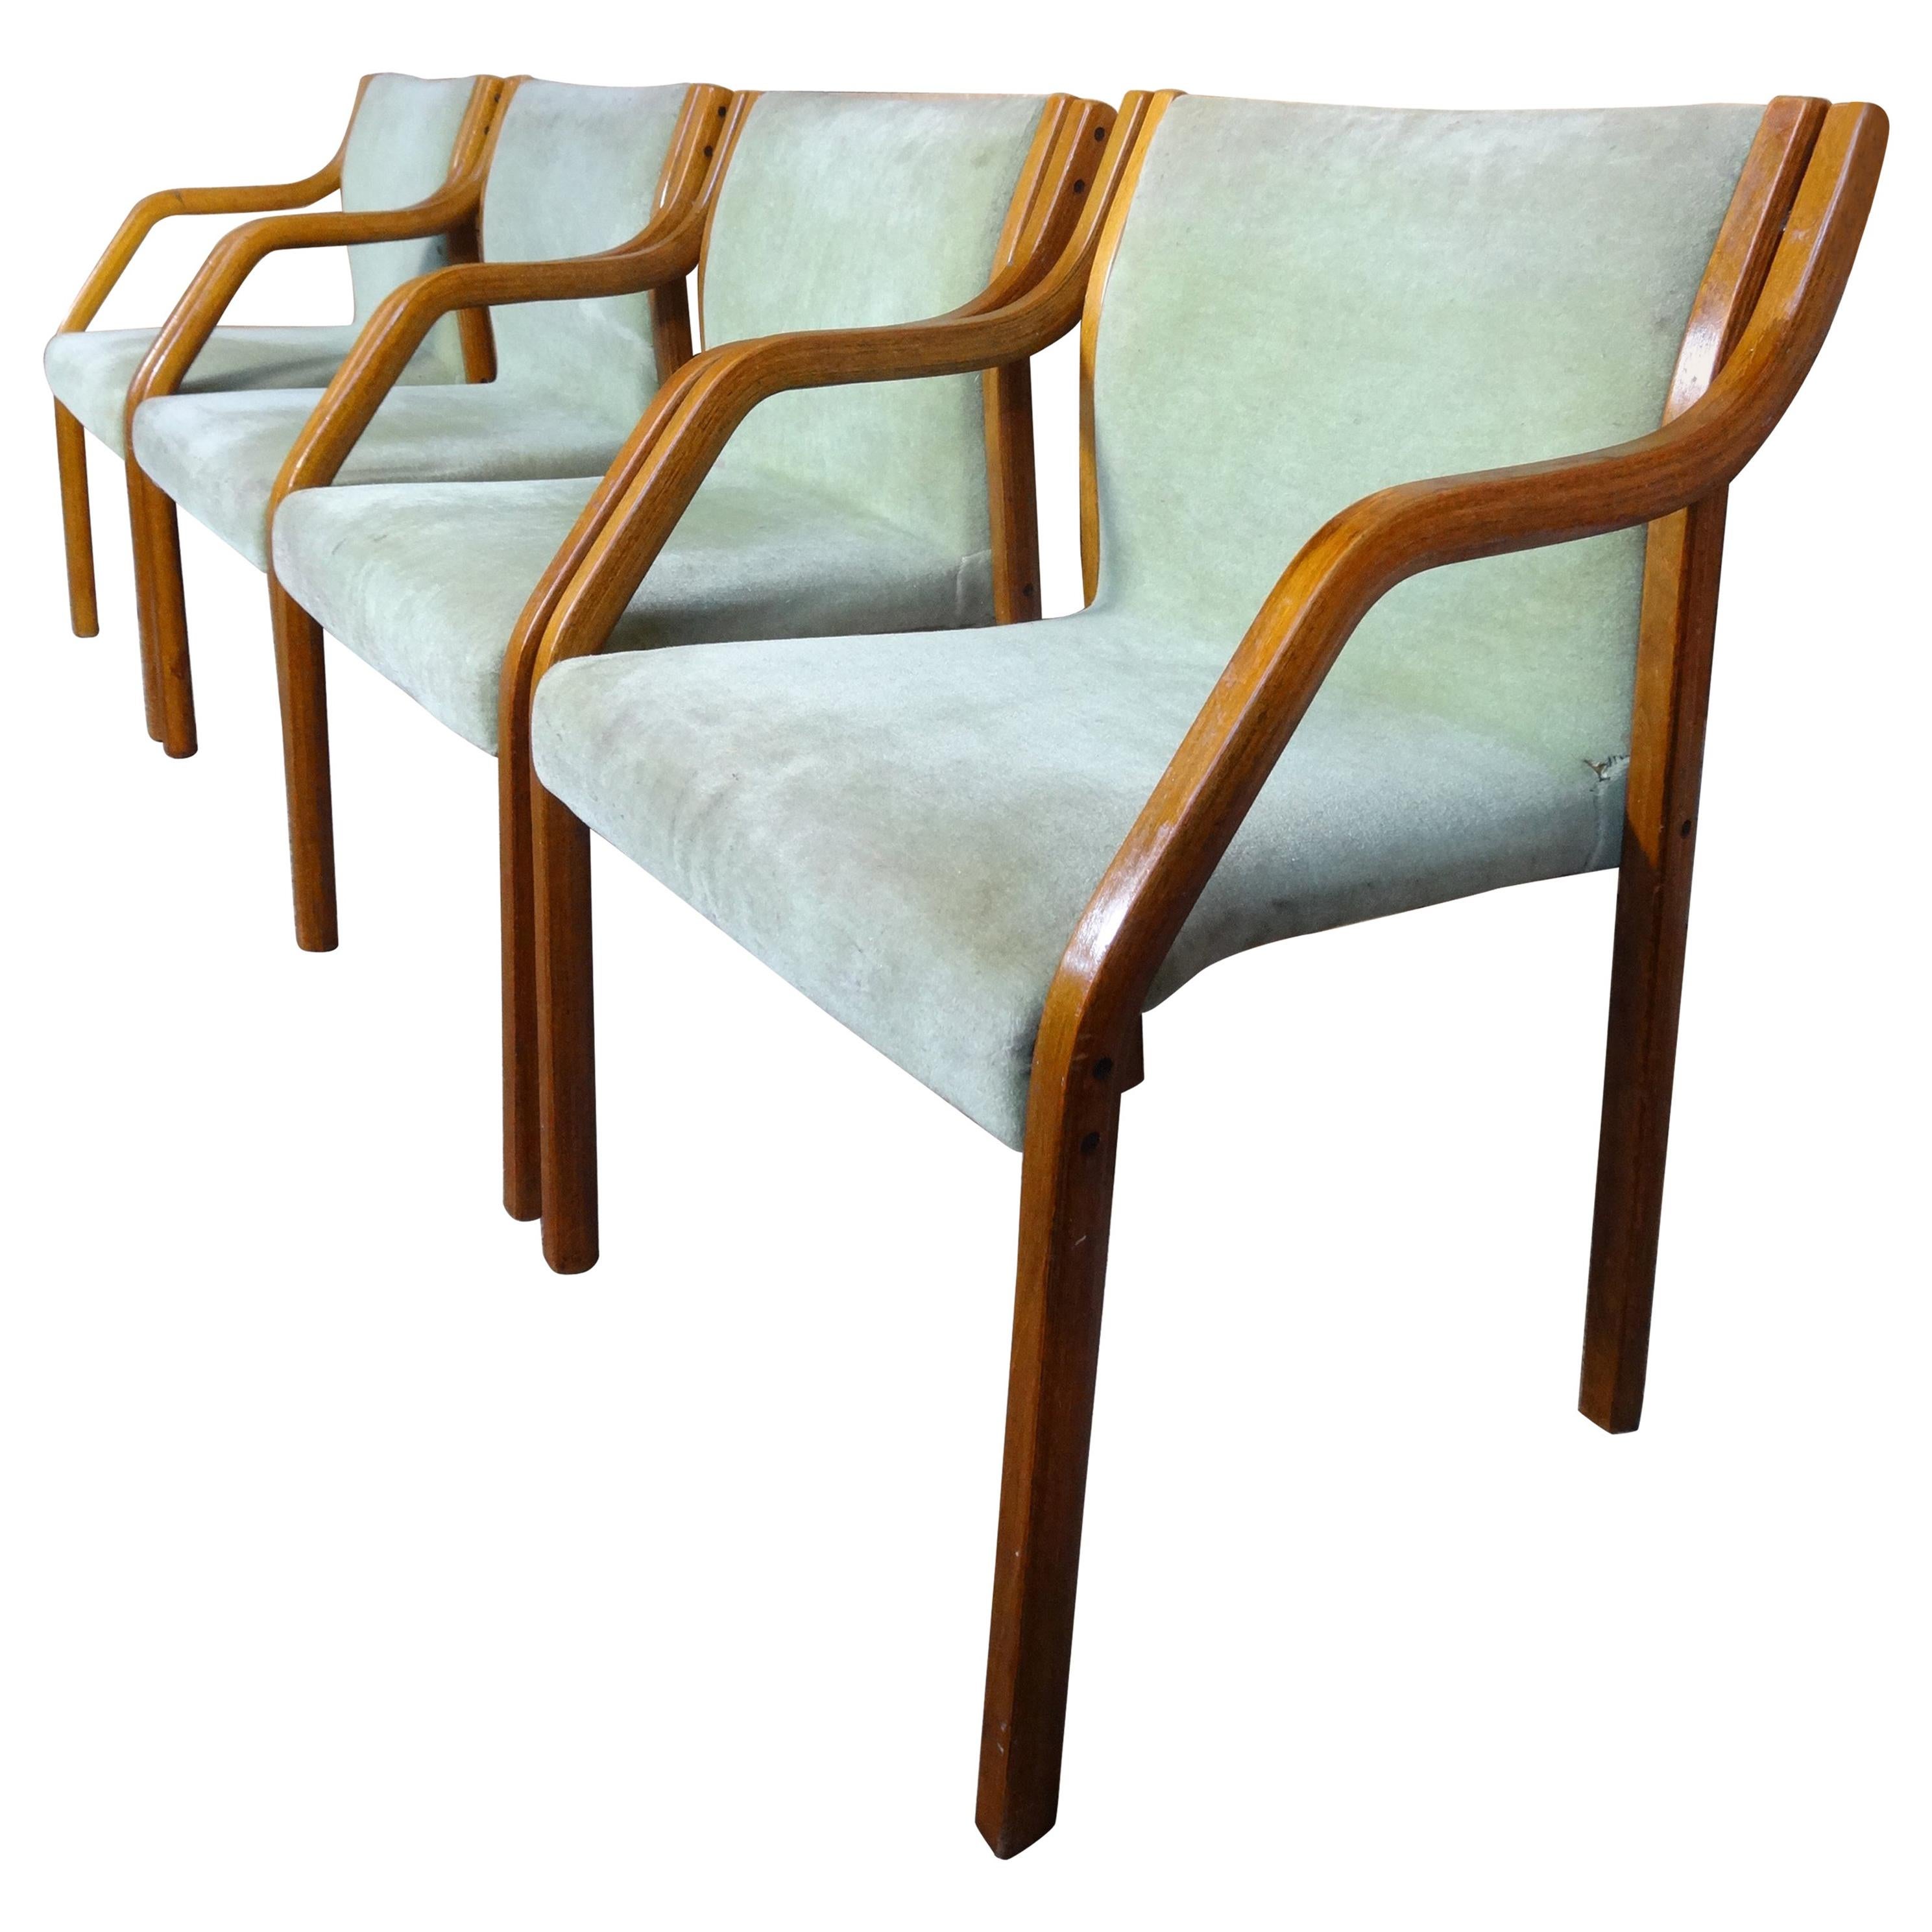 Four Early 1970s Dining Chairs in the Style of Preben Fabricius / Knoll